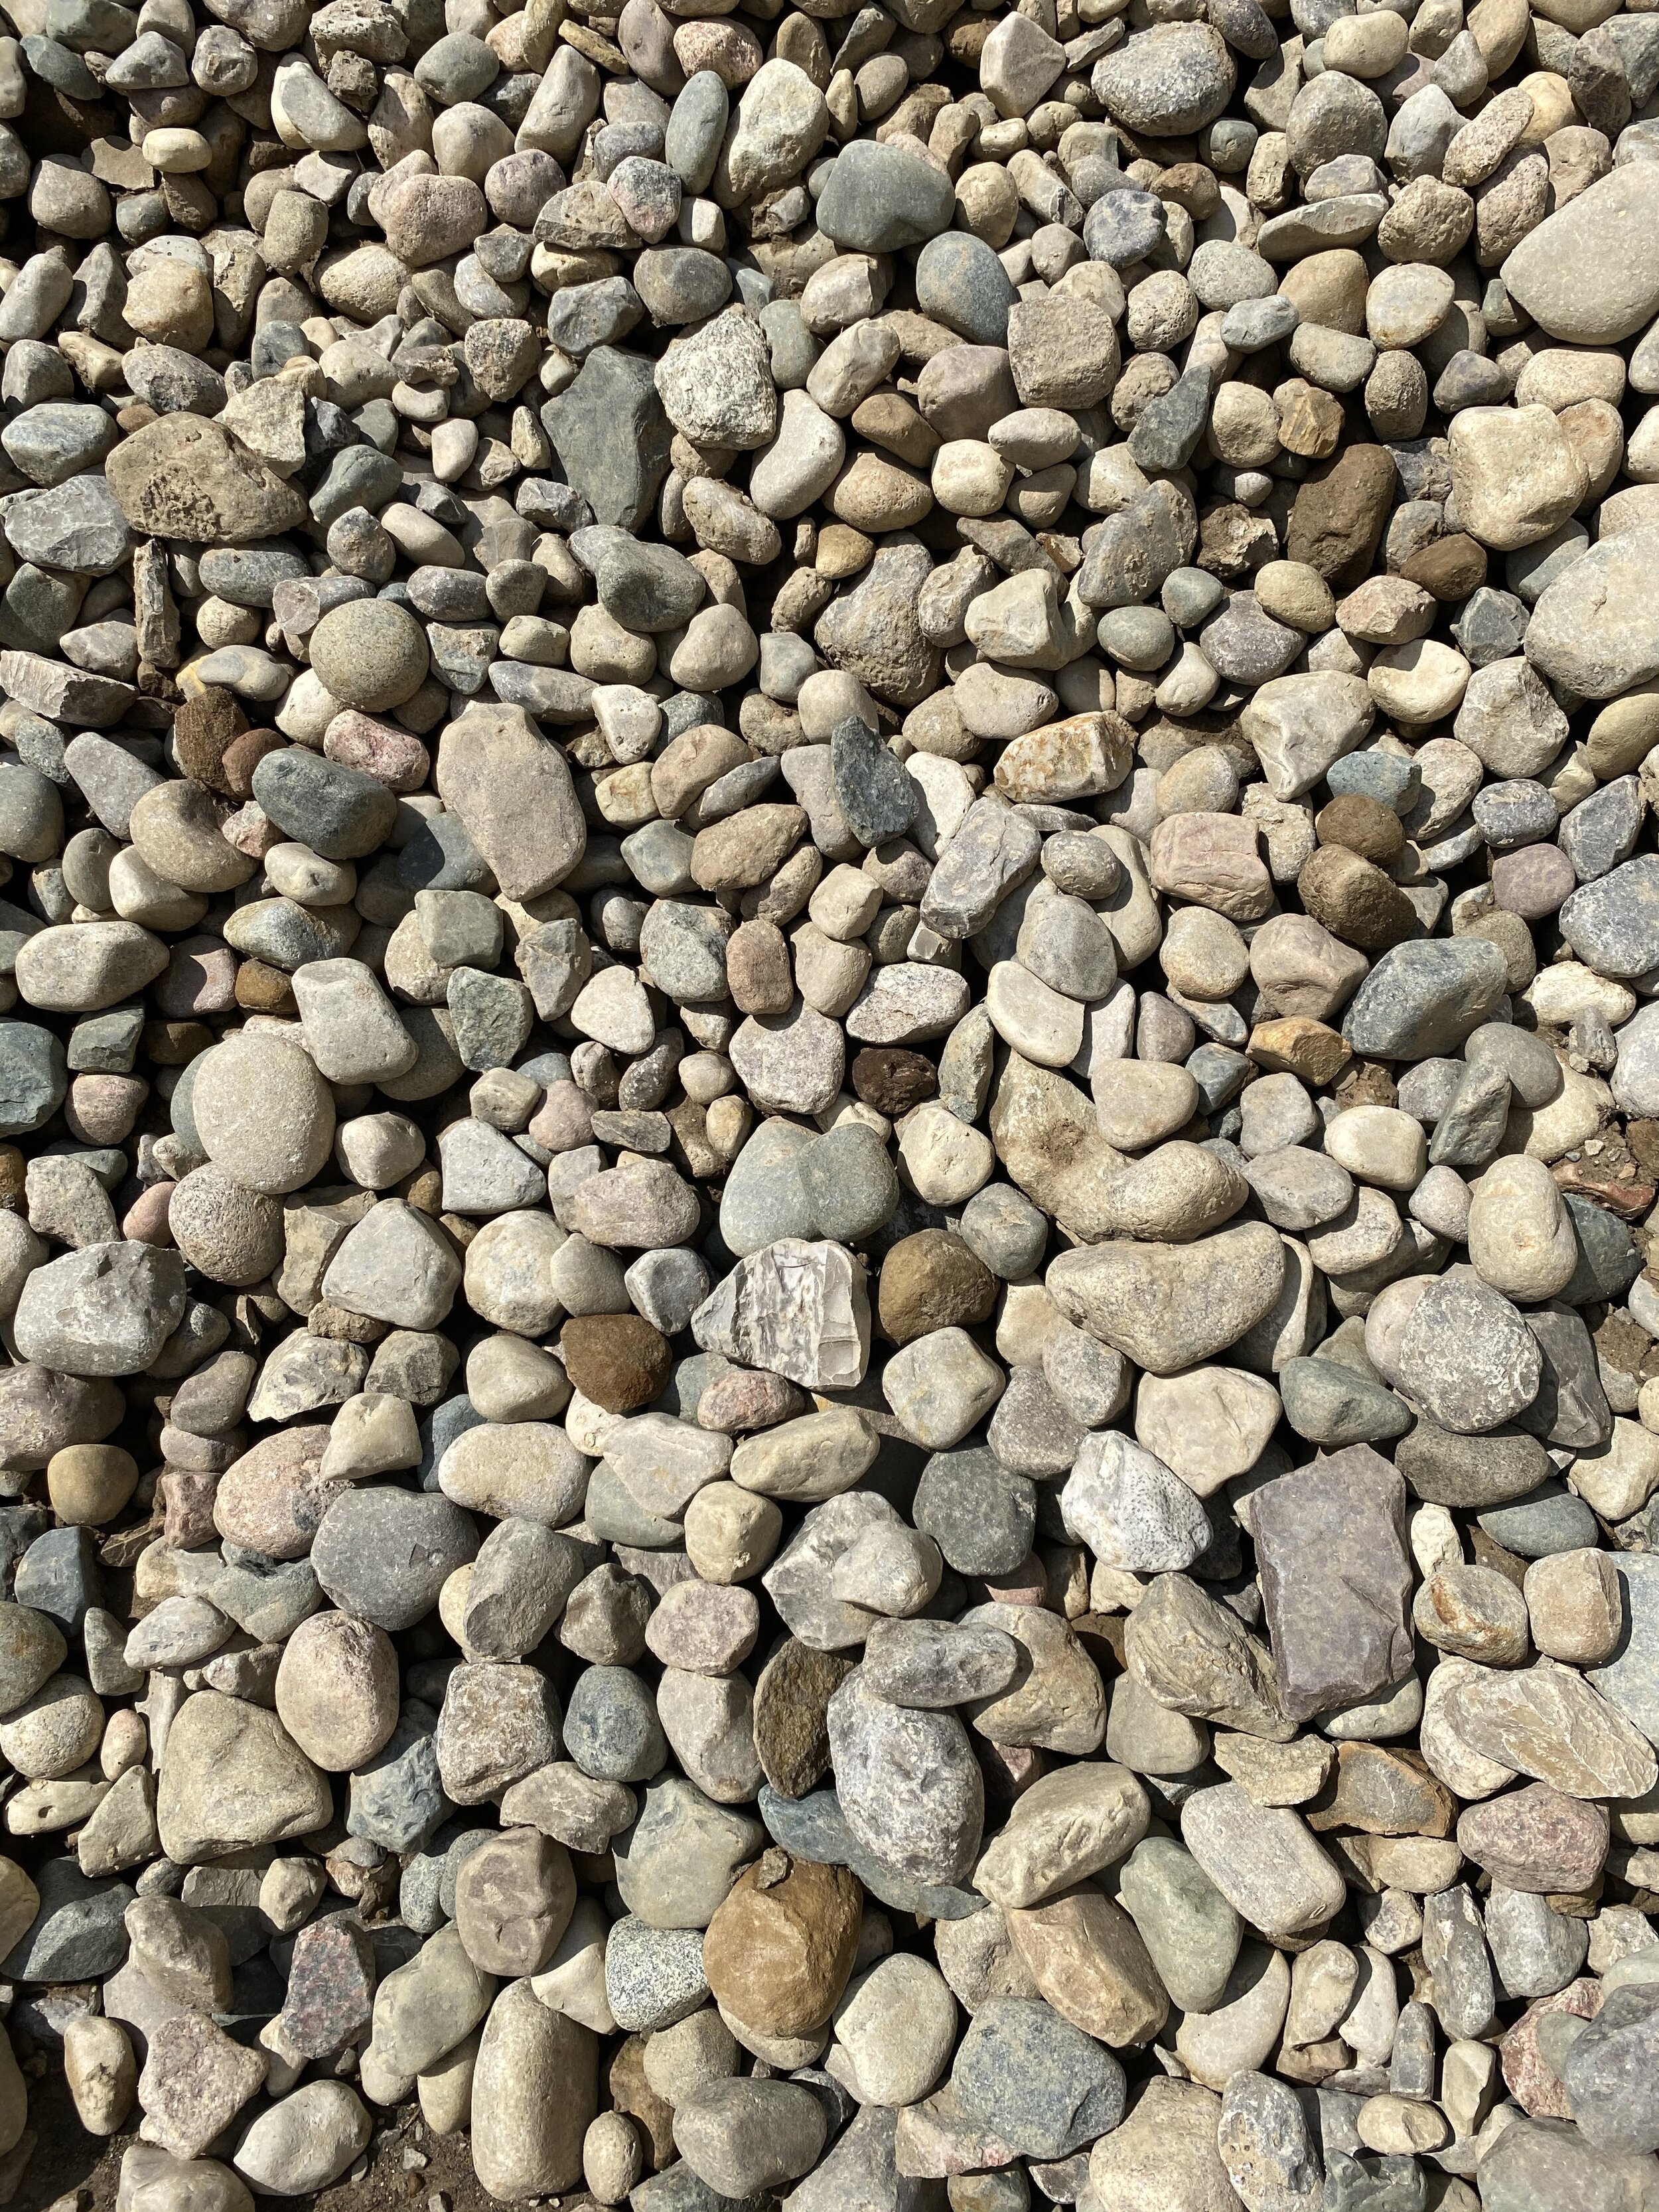 MSI Nile Gray Pebbles 05 cu ft per Bag 1 in to 25 in Bagged  Landscape Rock QNILGRY6NAT40  The Home Depot